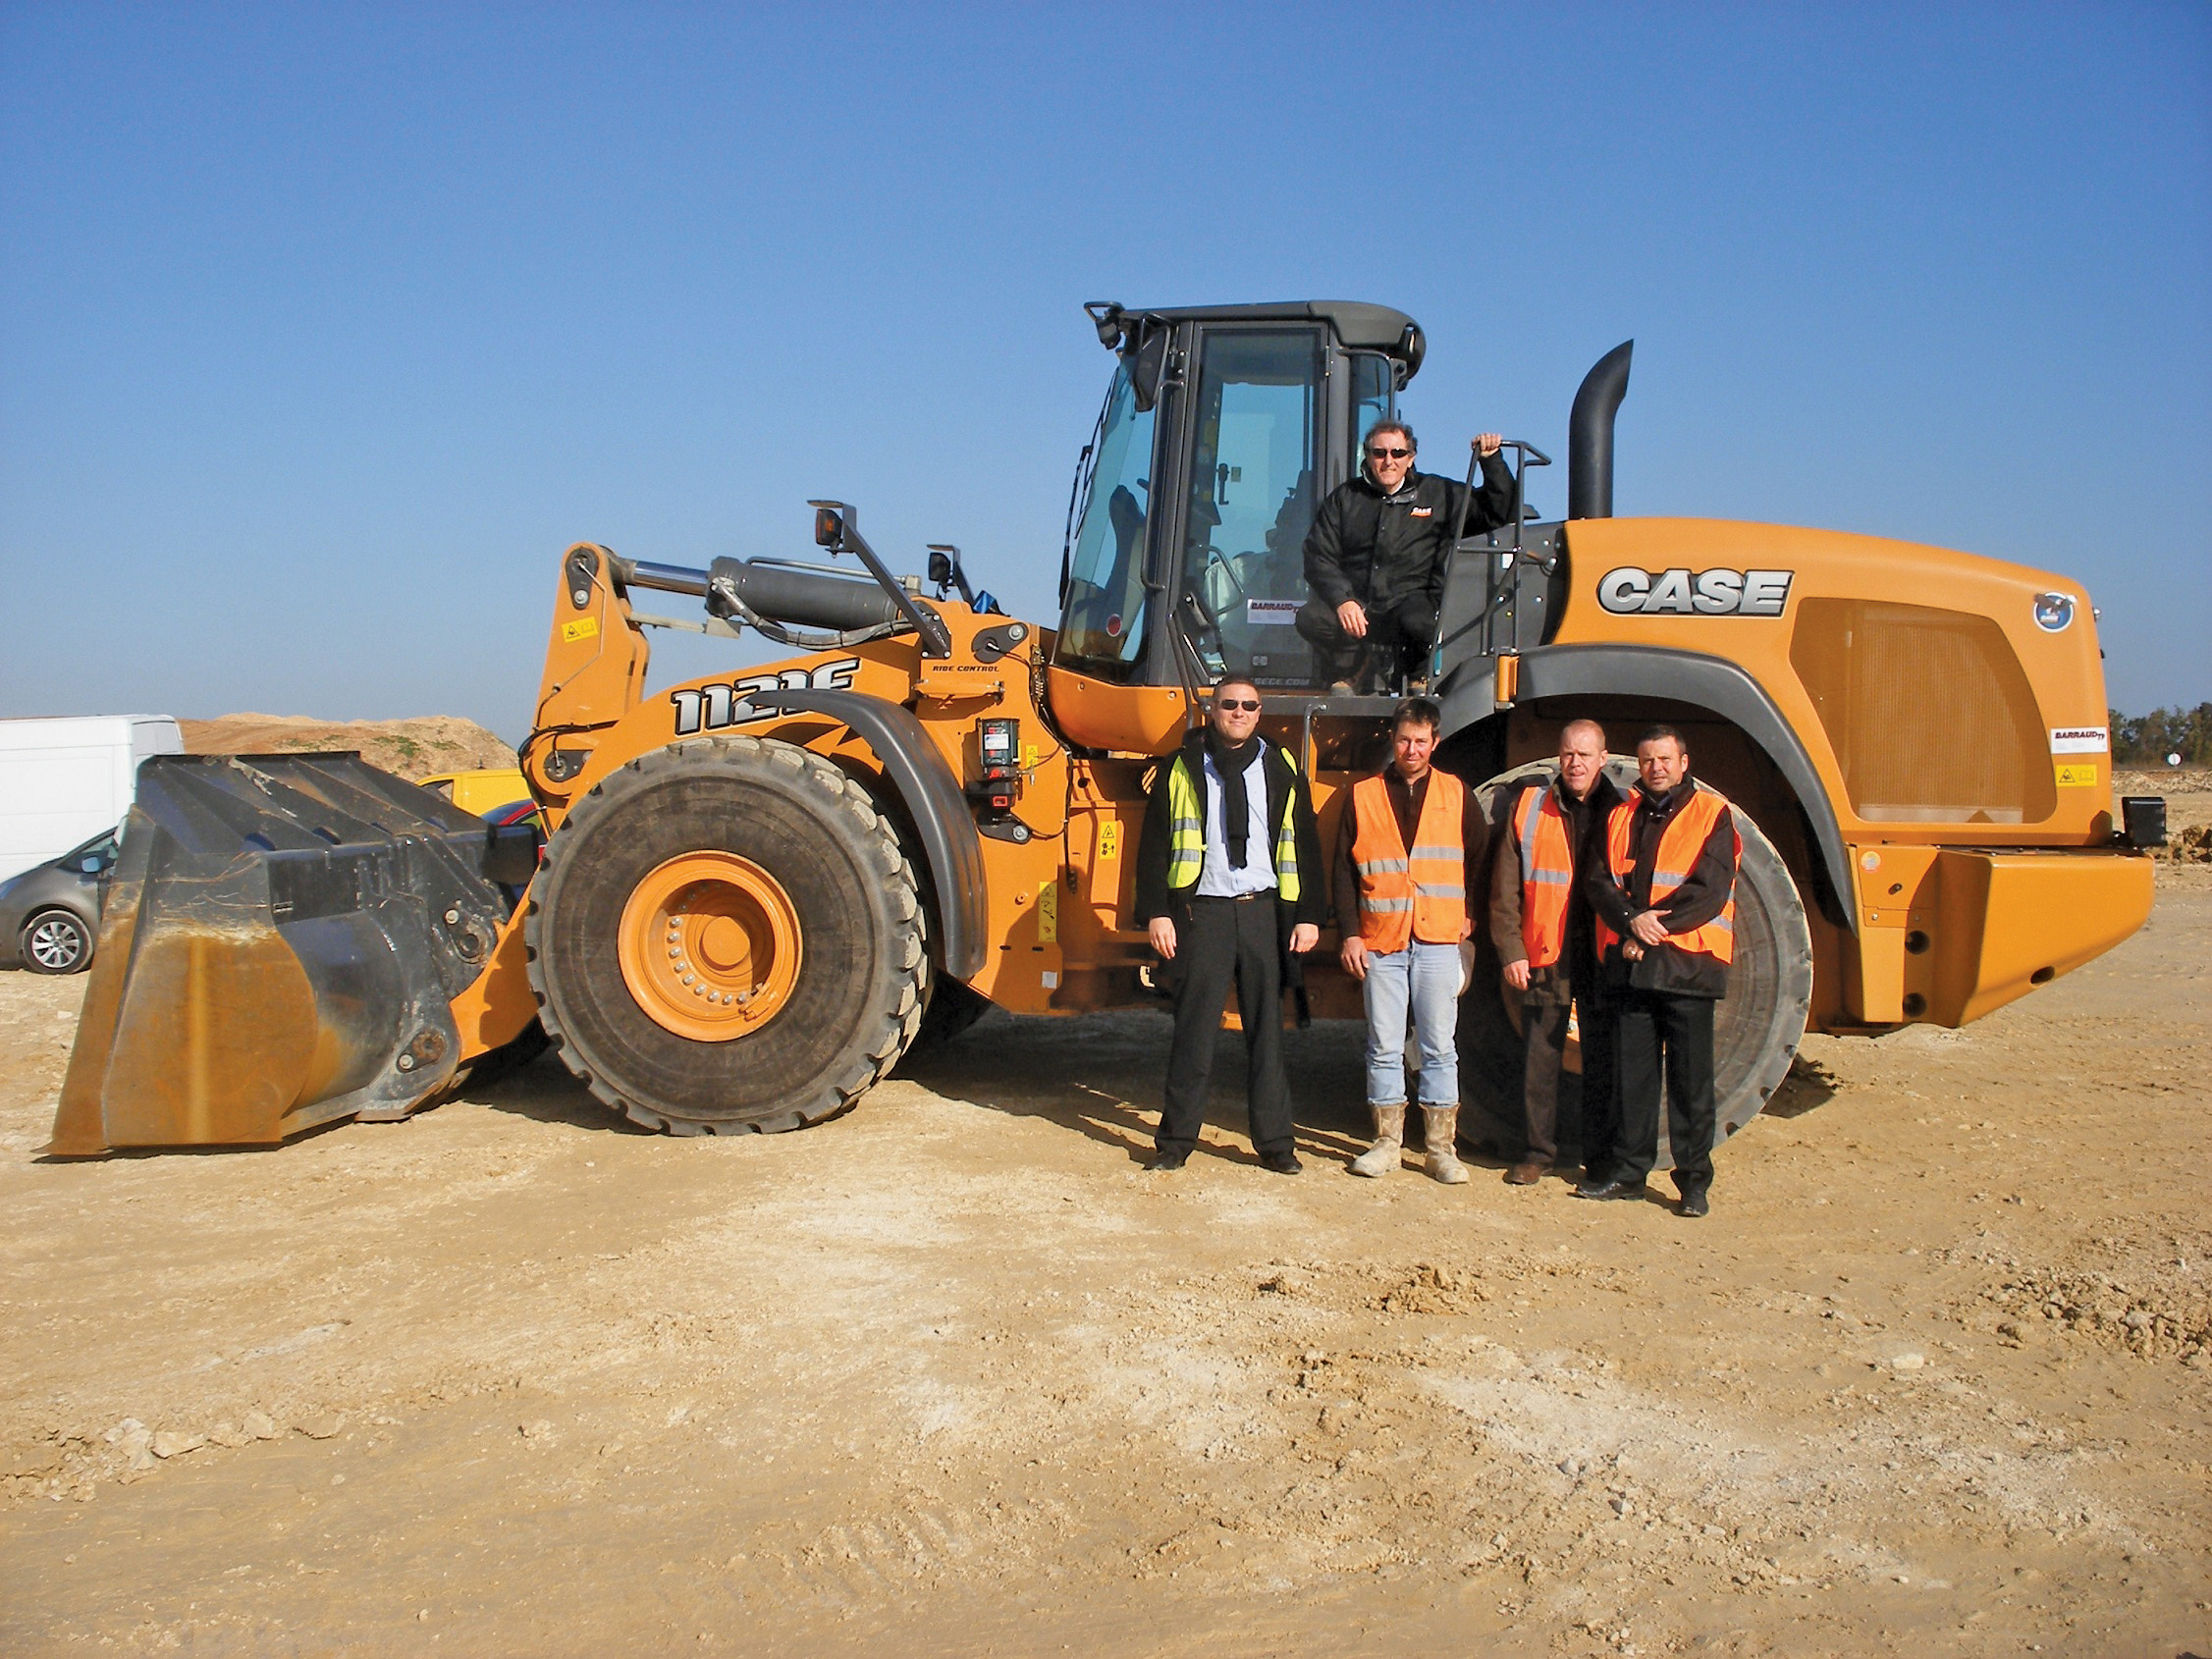 Trézence TP takes delivery of the Case 1121F wheeled loader